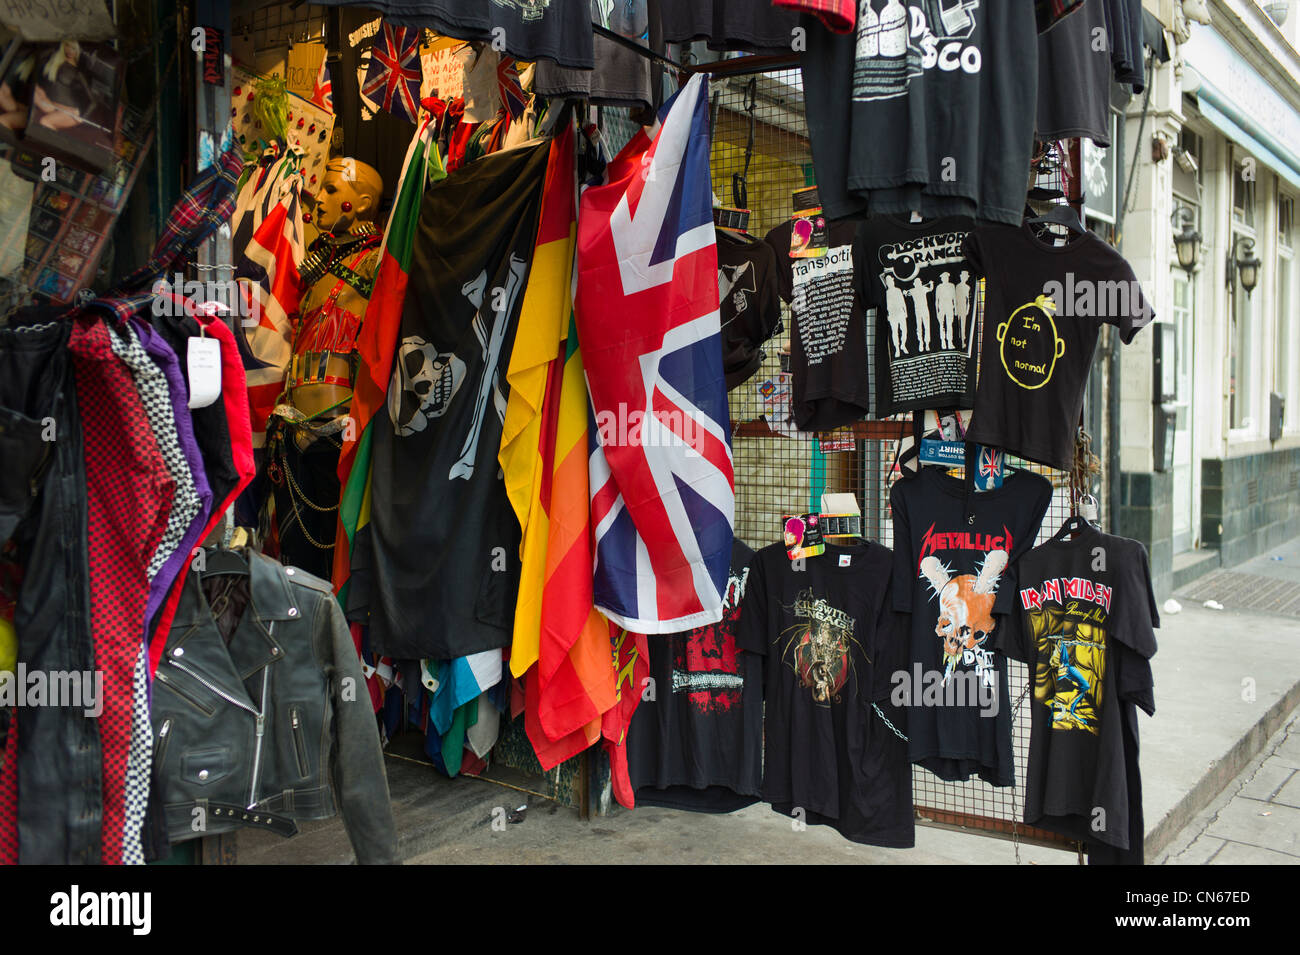 Display of Union Jack flag & t-shirts, outside shop in Camden Market, Camden Town, London Stock Photo